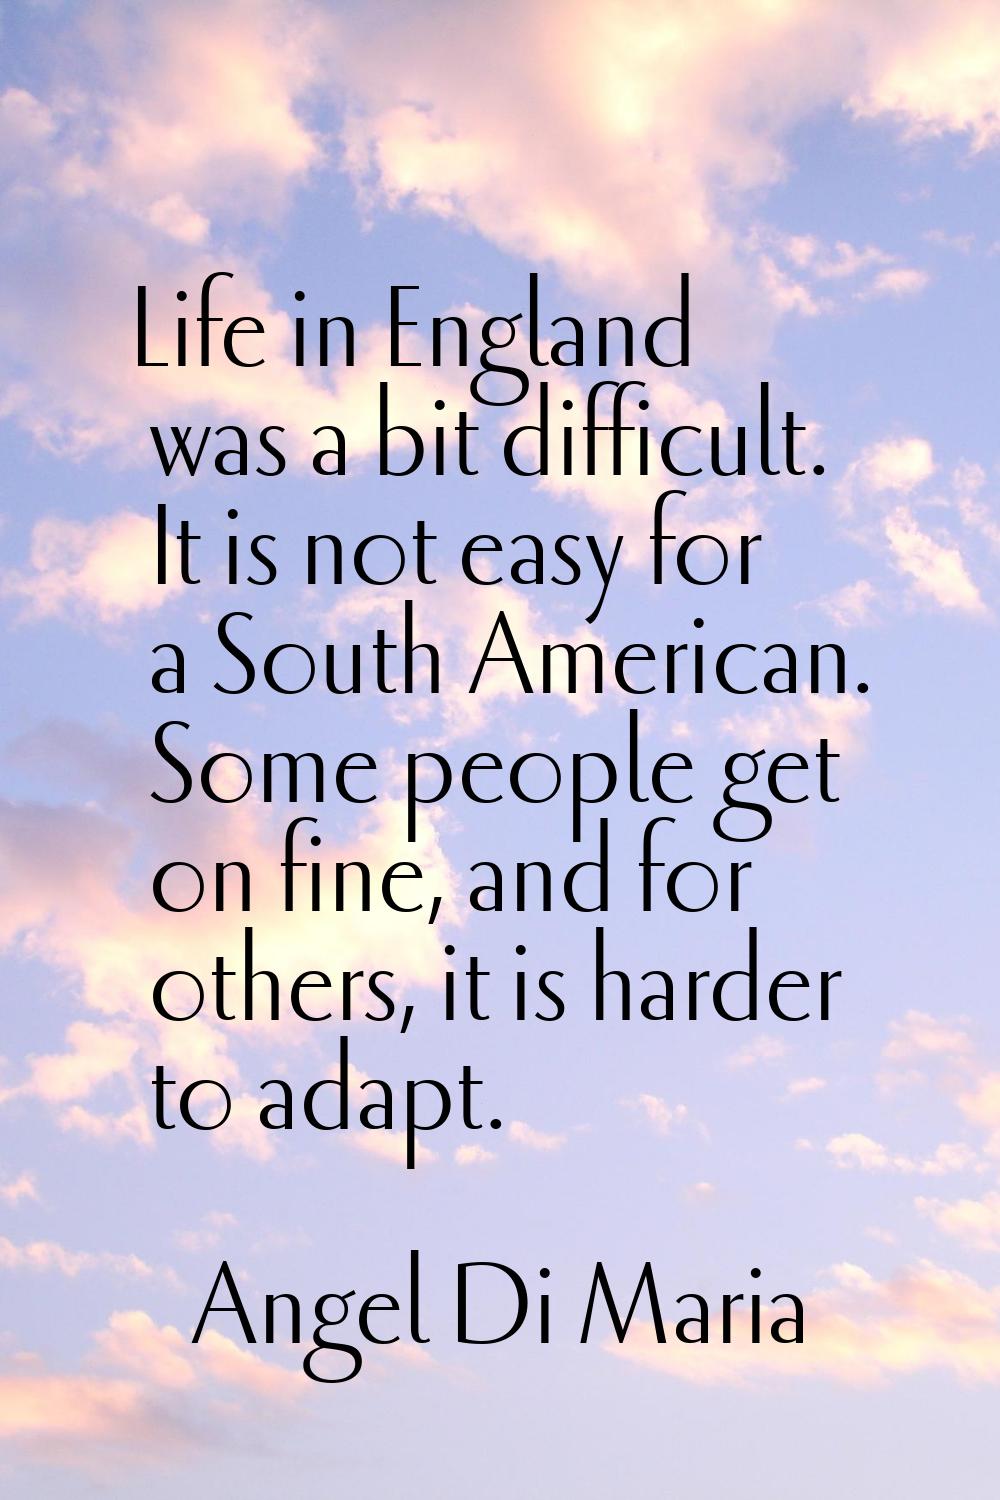 Life in England was a bit difficult. It is not easy for a South American. Some people get on fine, 